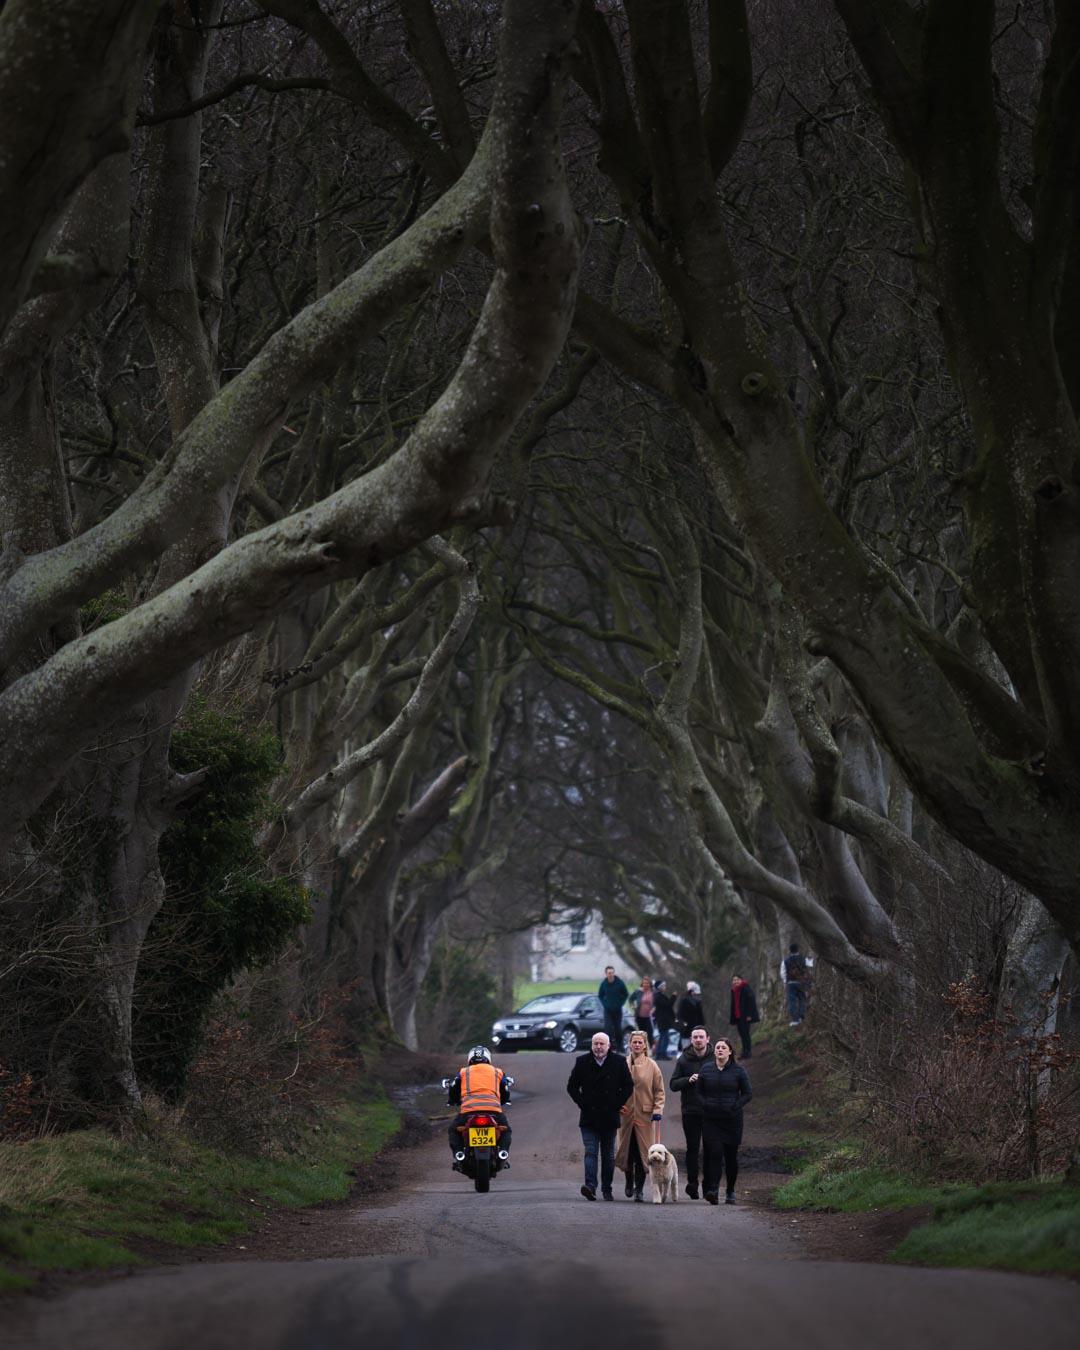 crowds in the dark hedges very popular place